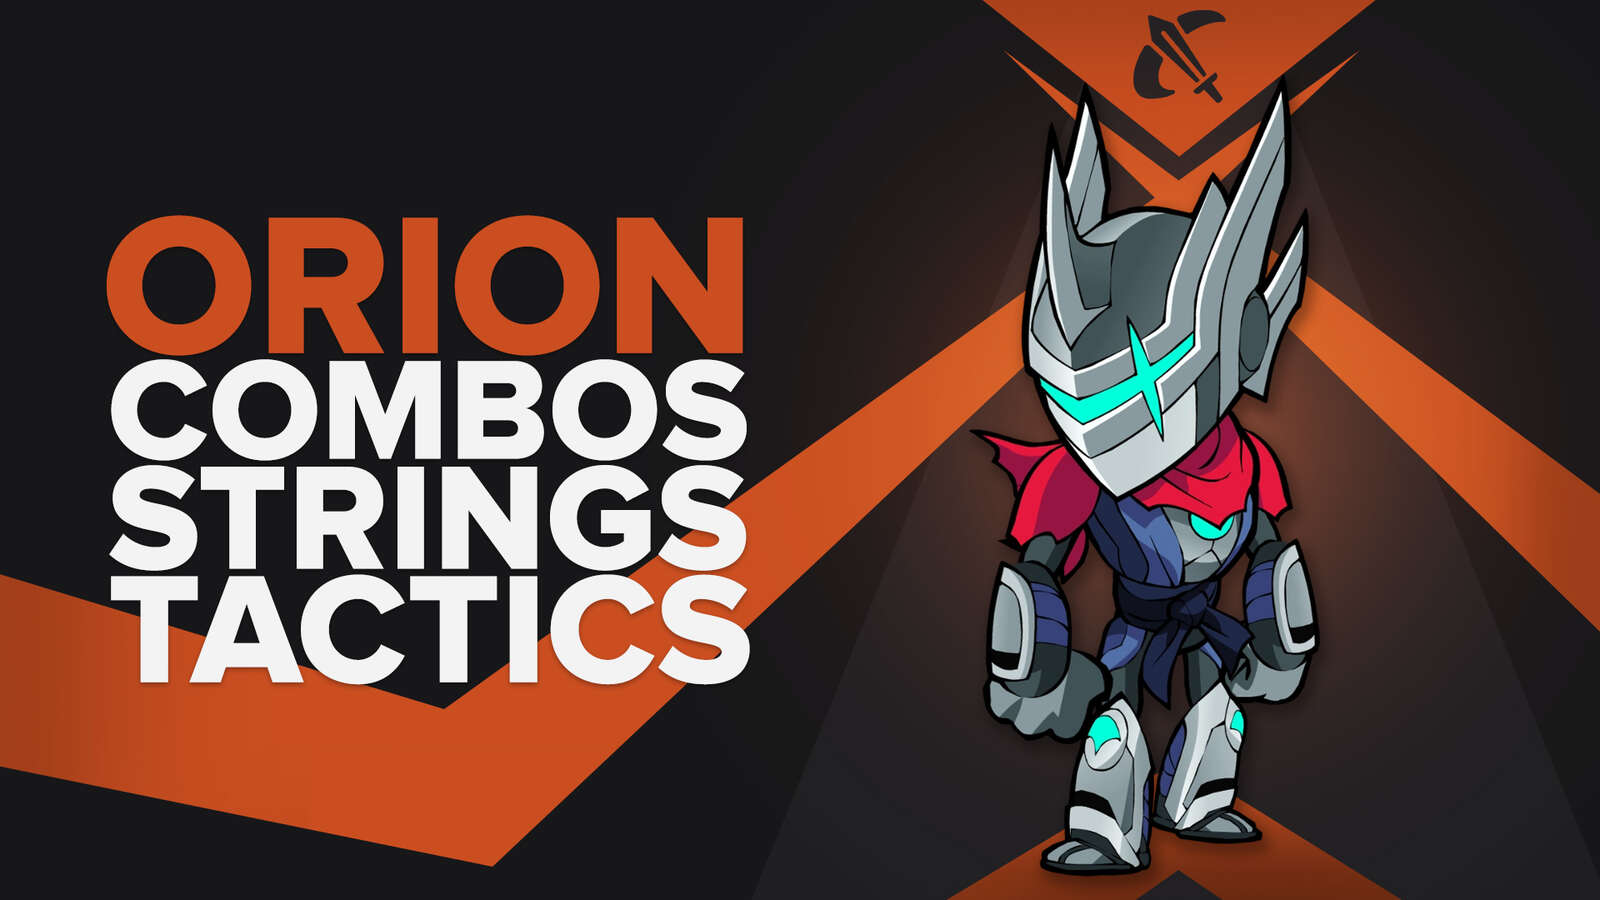 Best Orion combos, strings and tips in Brawlhalla